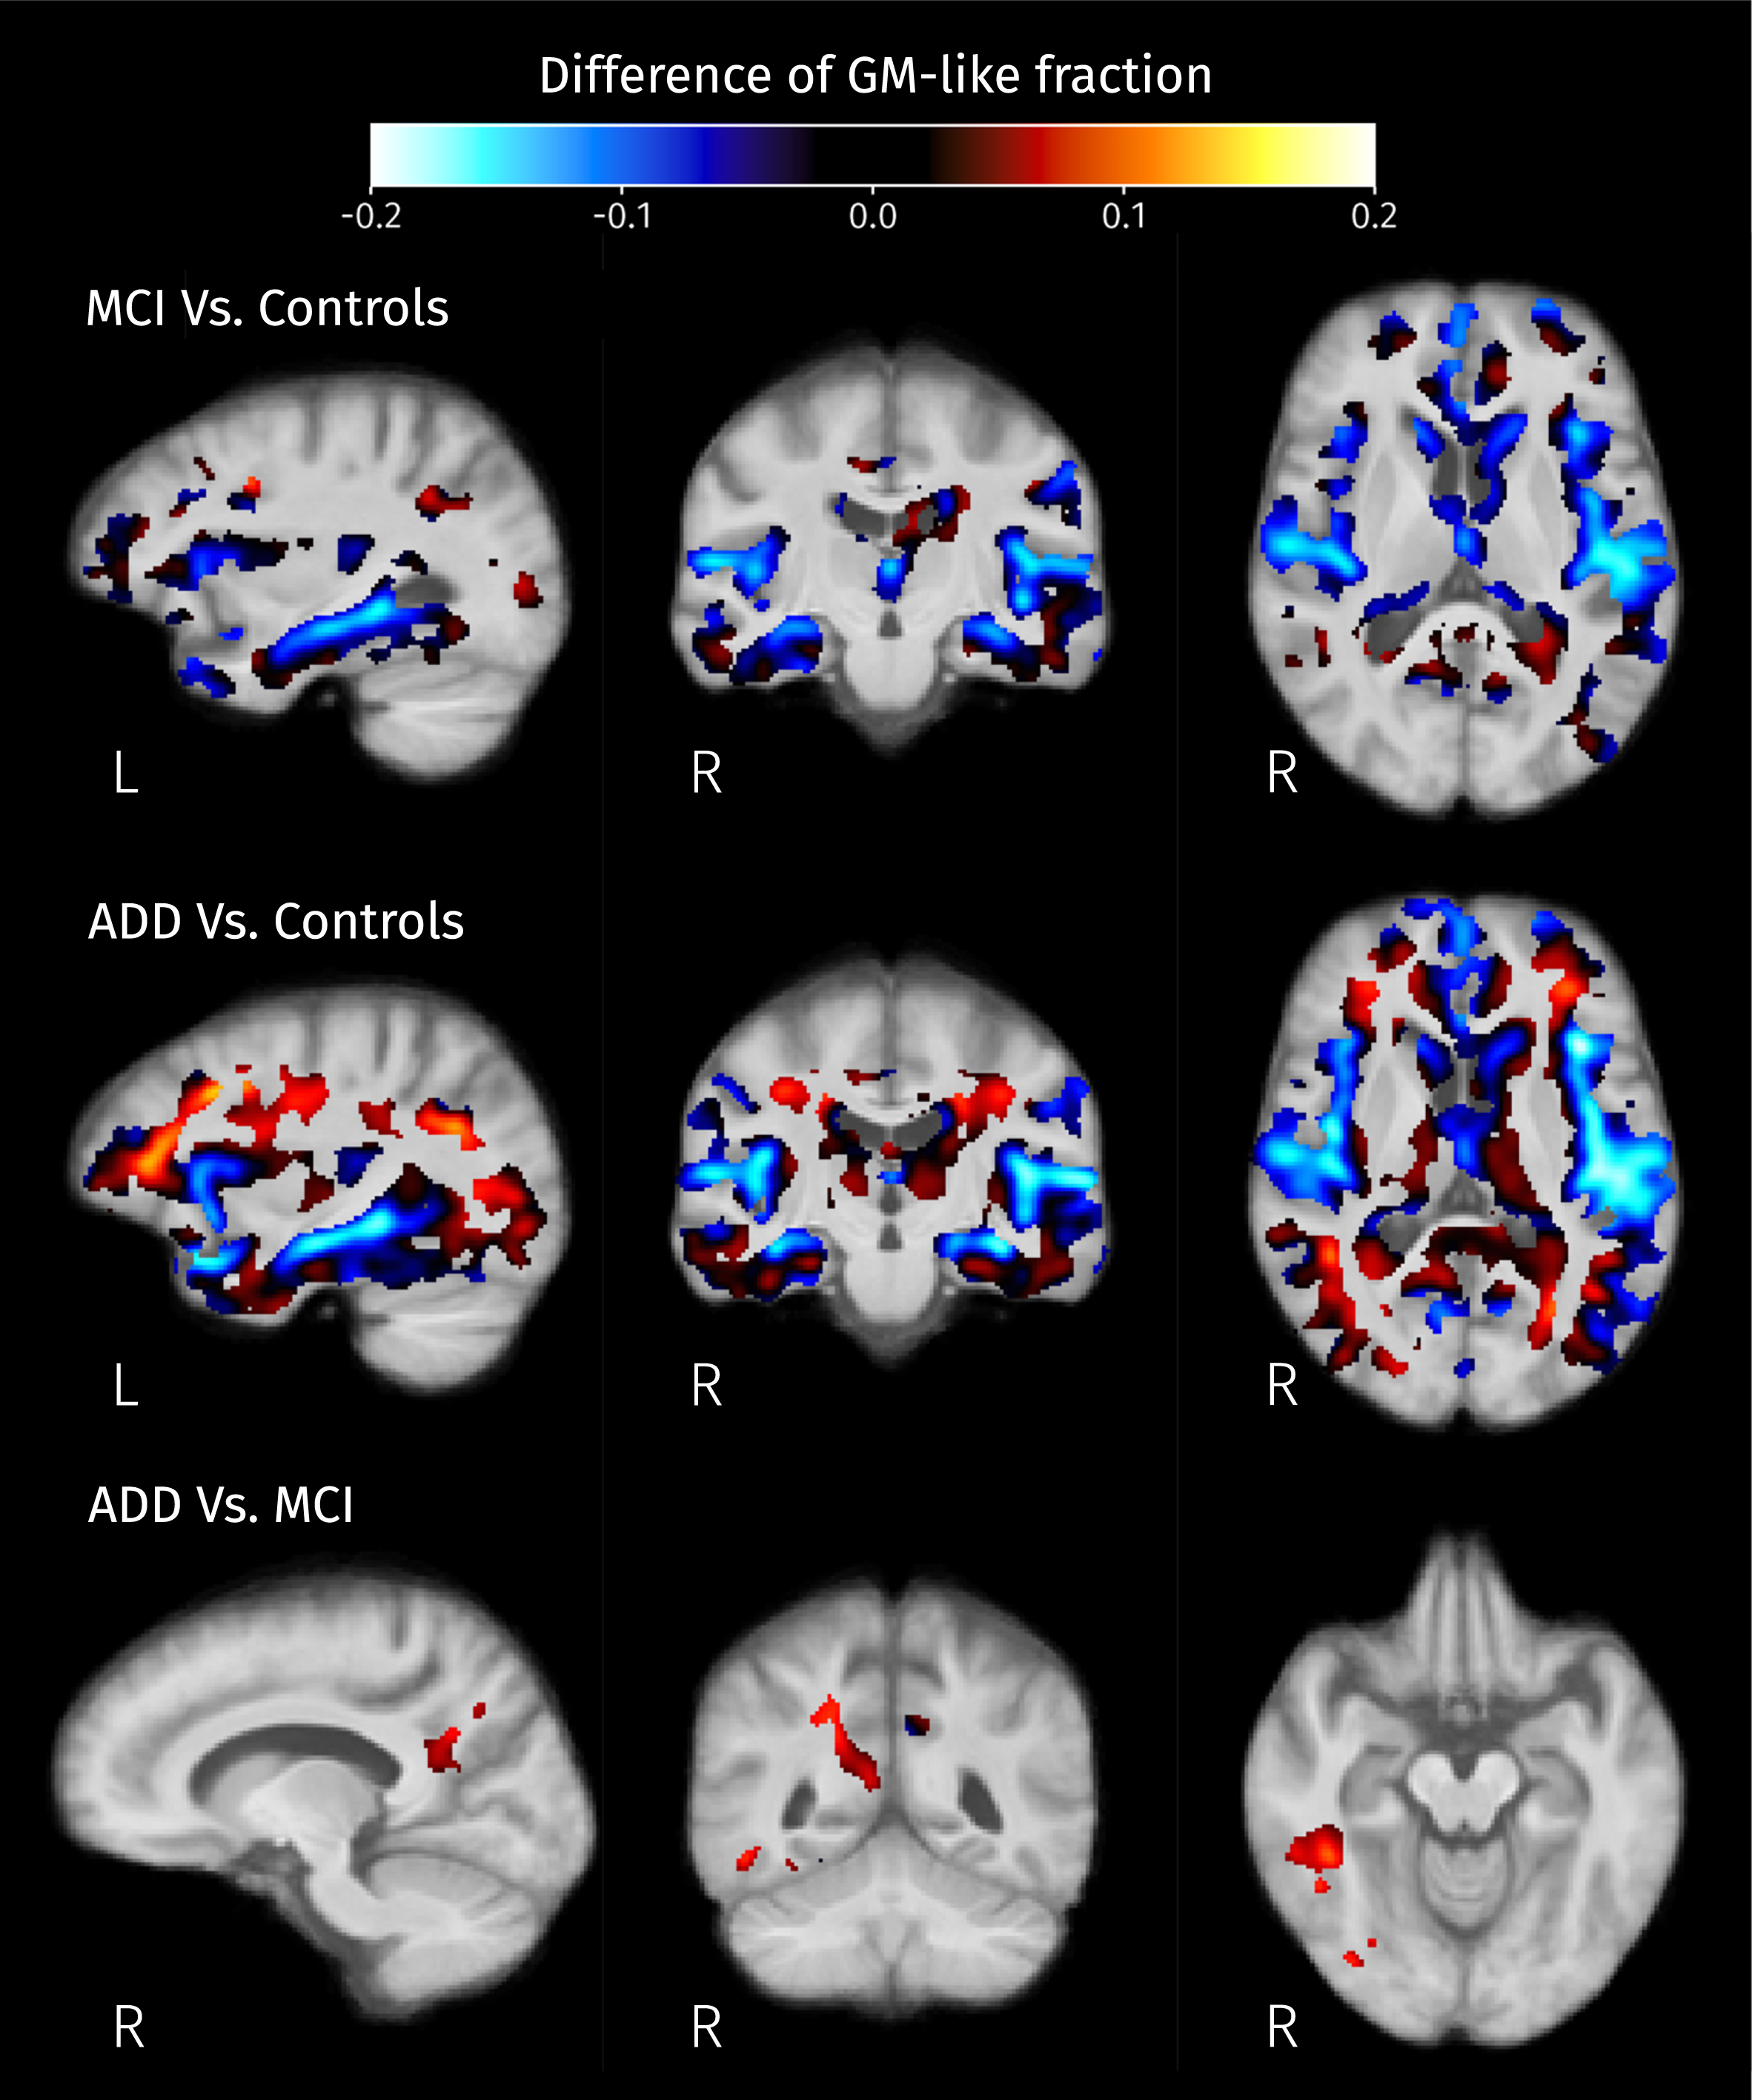 Differences of mean GM-like fraction in brain areas where at least one of isometric log-ratios is significantly different (strong FWE-corrected p < 0.05) between pairs of groups.